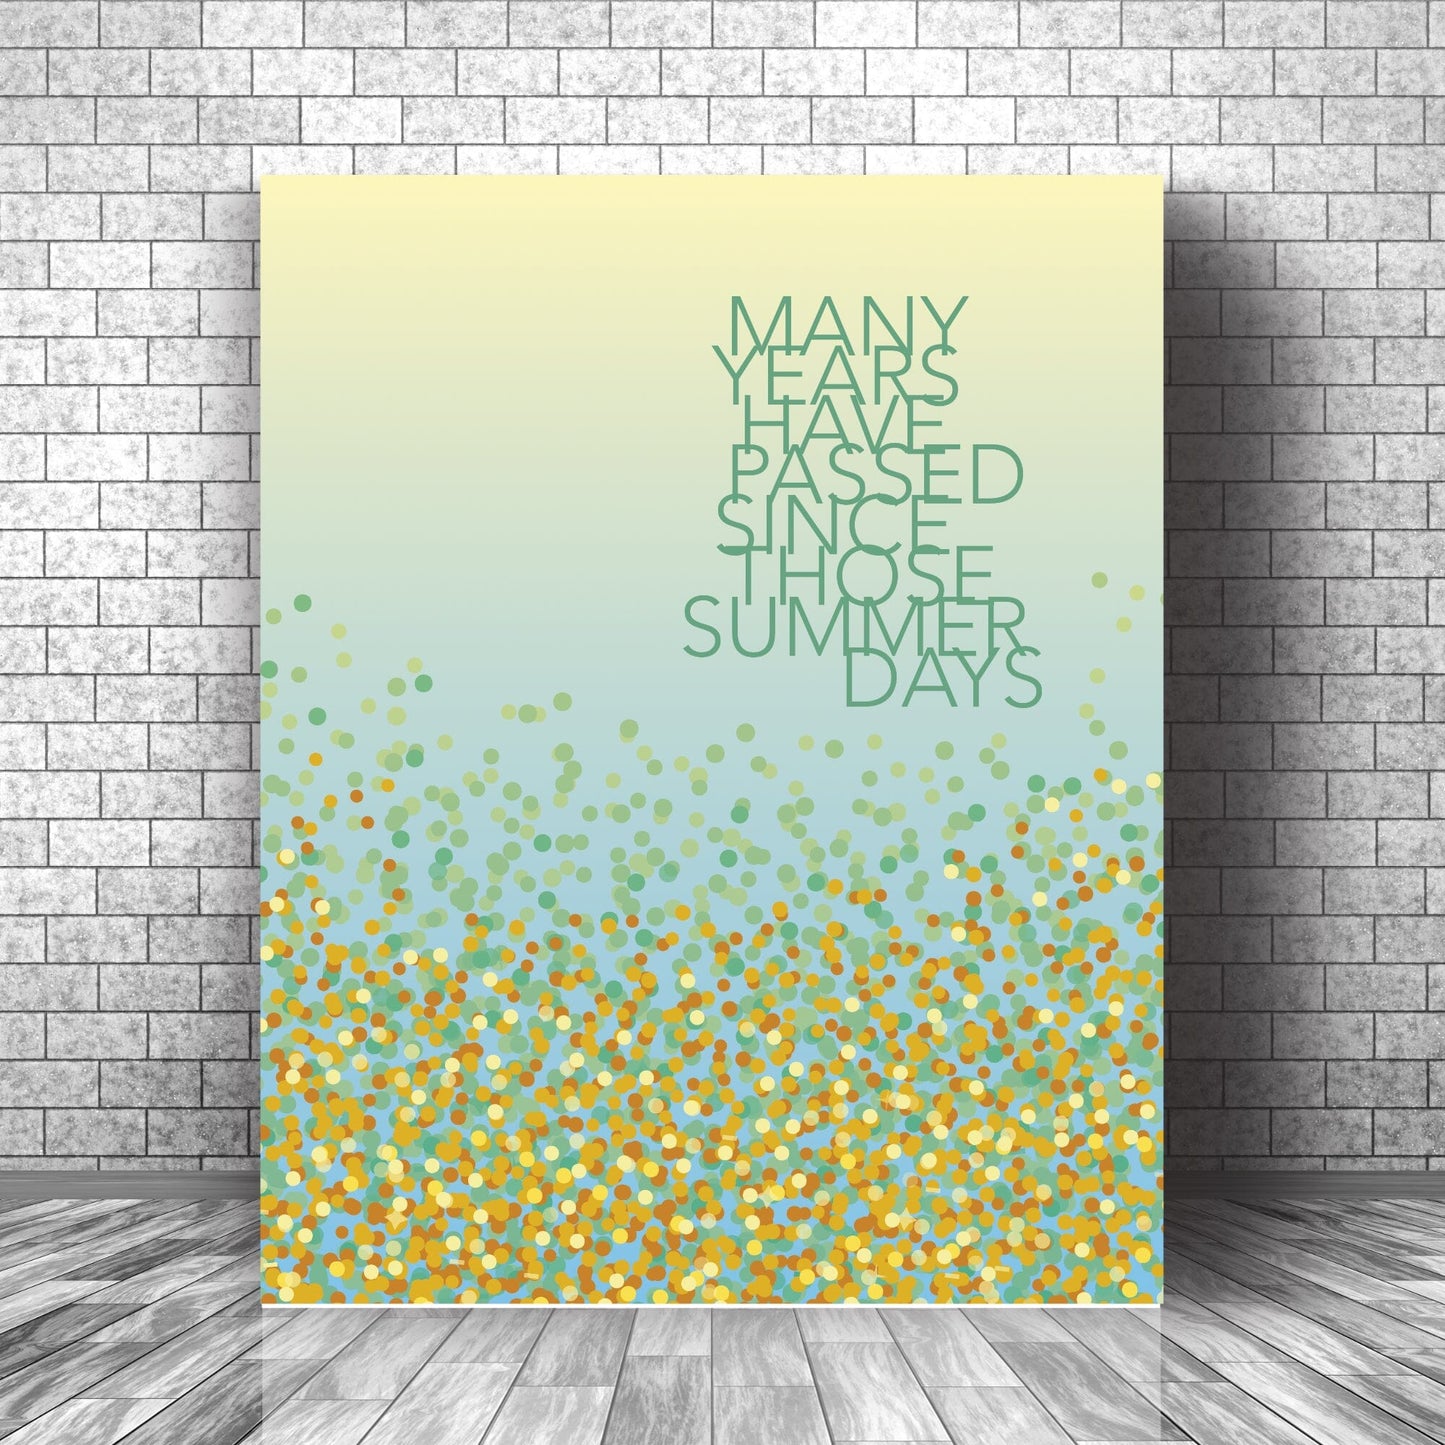 Fields of Gold by Sting - 80s Song Lyric Art Print Decor Song Lyrics Art Song Lyrics Art 11x14 Canvas Wrap 